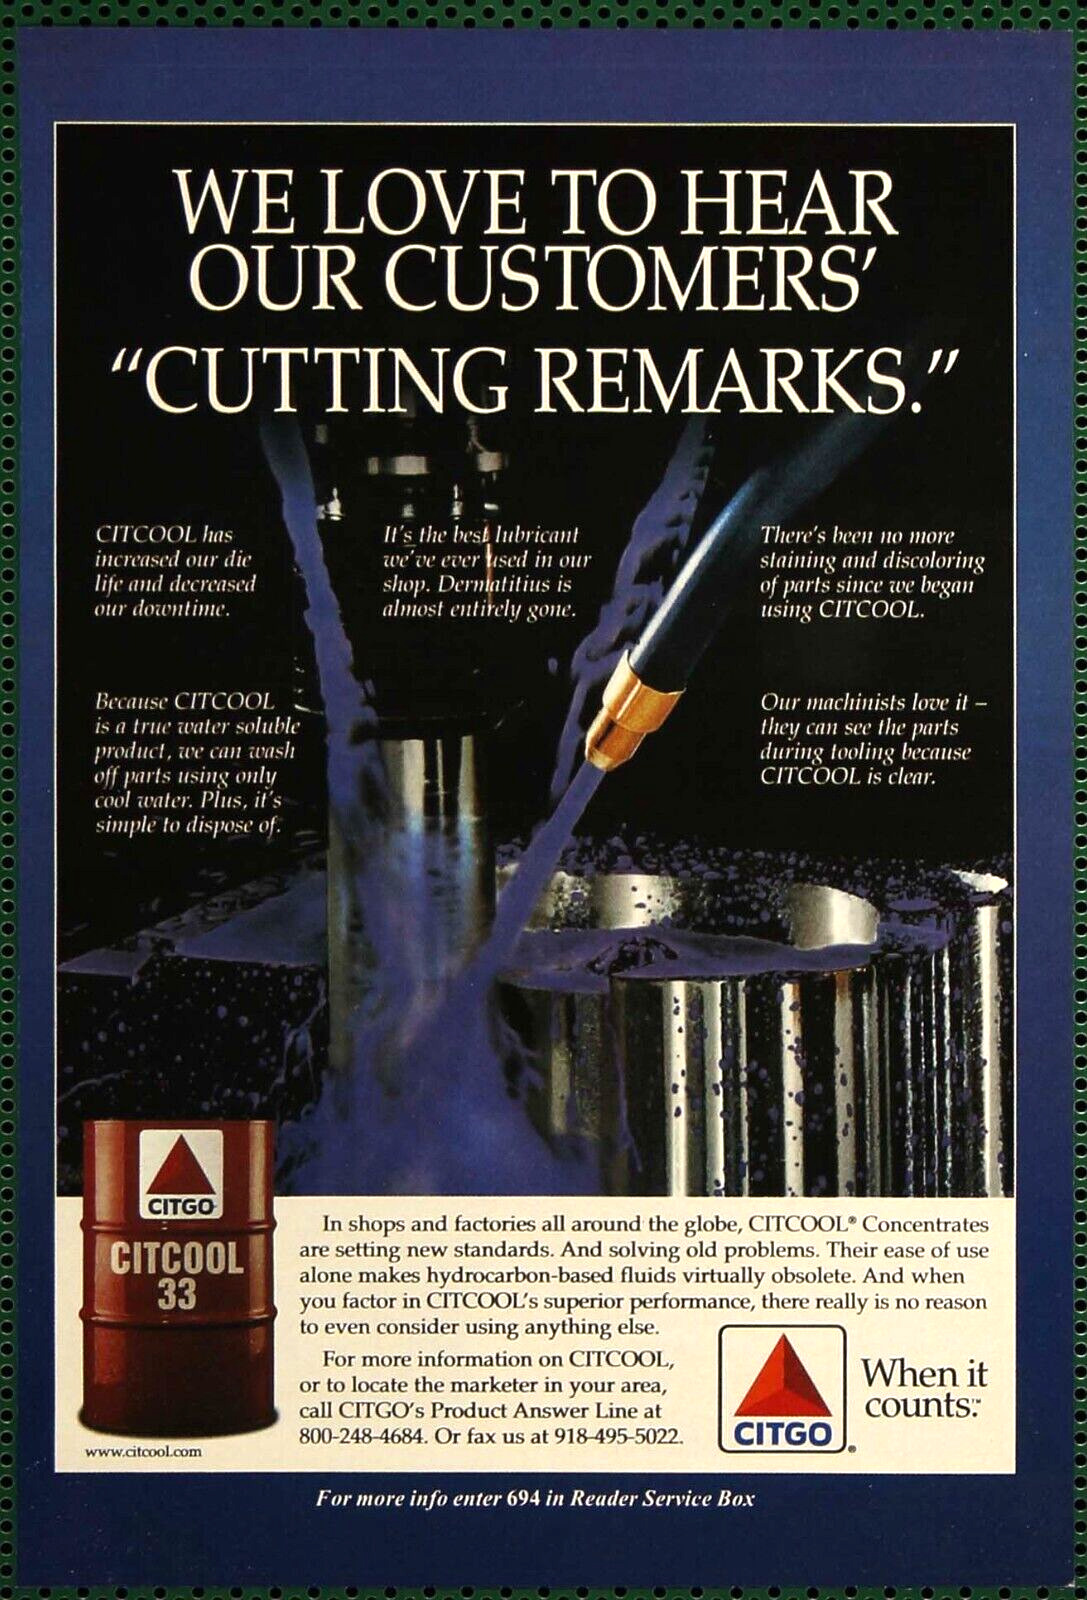 Citgo Citcool 33 Water Soluble Machining Cutting Lubricant Vintage Print Ad 1998